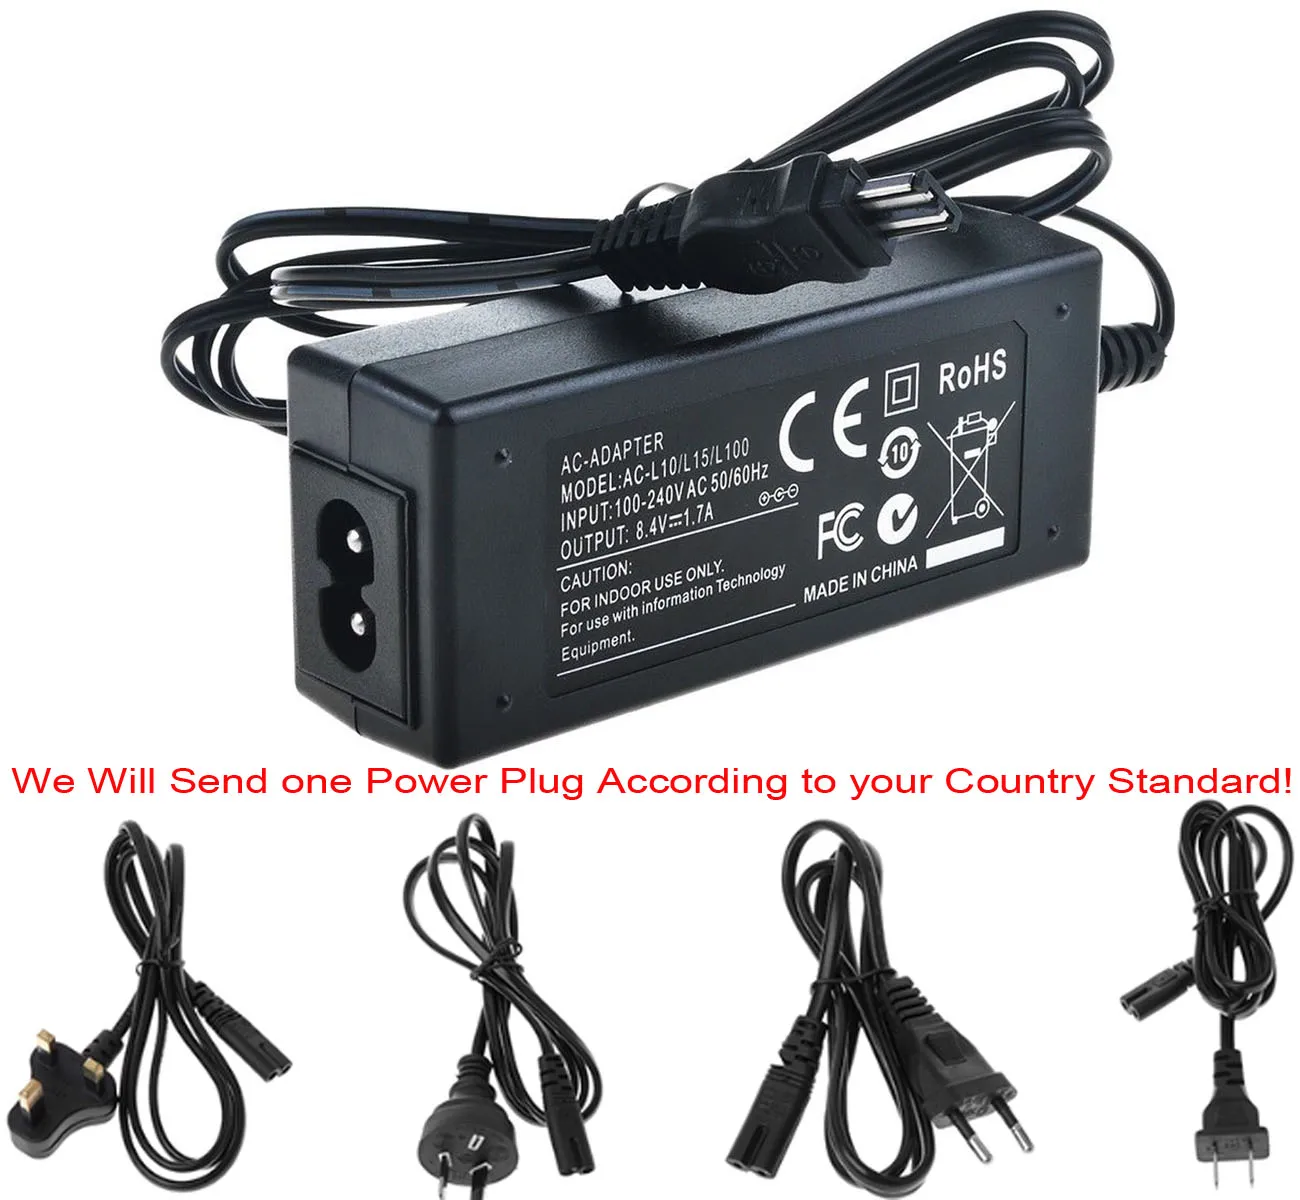 

AC Power Adapter Charger for Sony DCR-TRV30, DCR-TRV40, DCR-TRV50, DCR-TRV60, DCR-TRV70, DCR-TRV75, DCR-TRV80 Handycam Camcorder